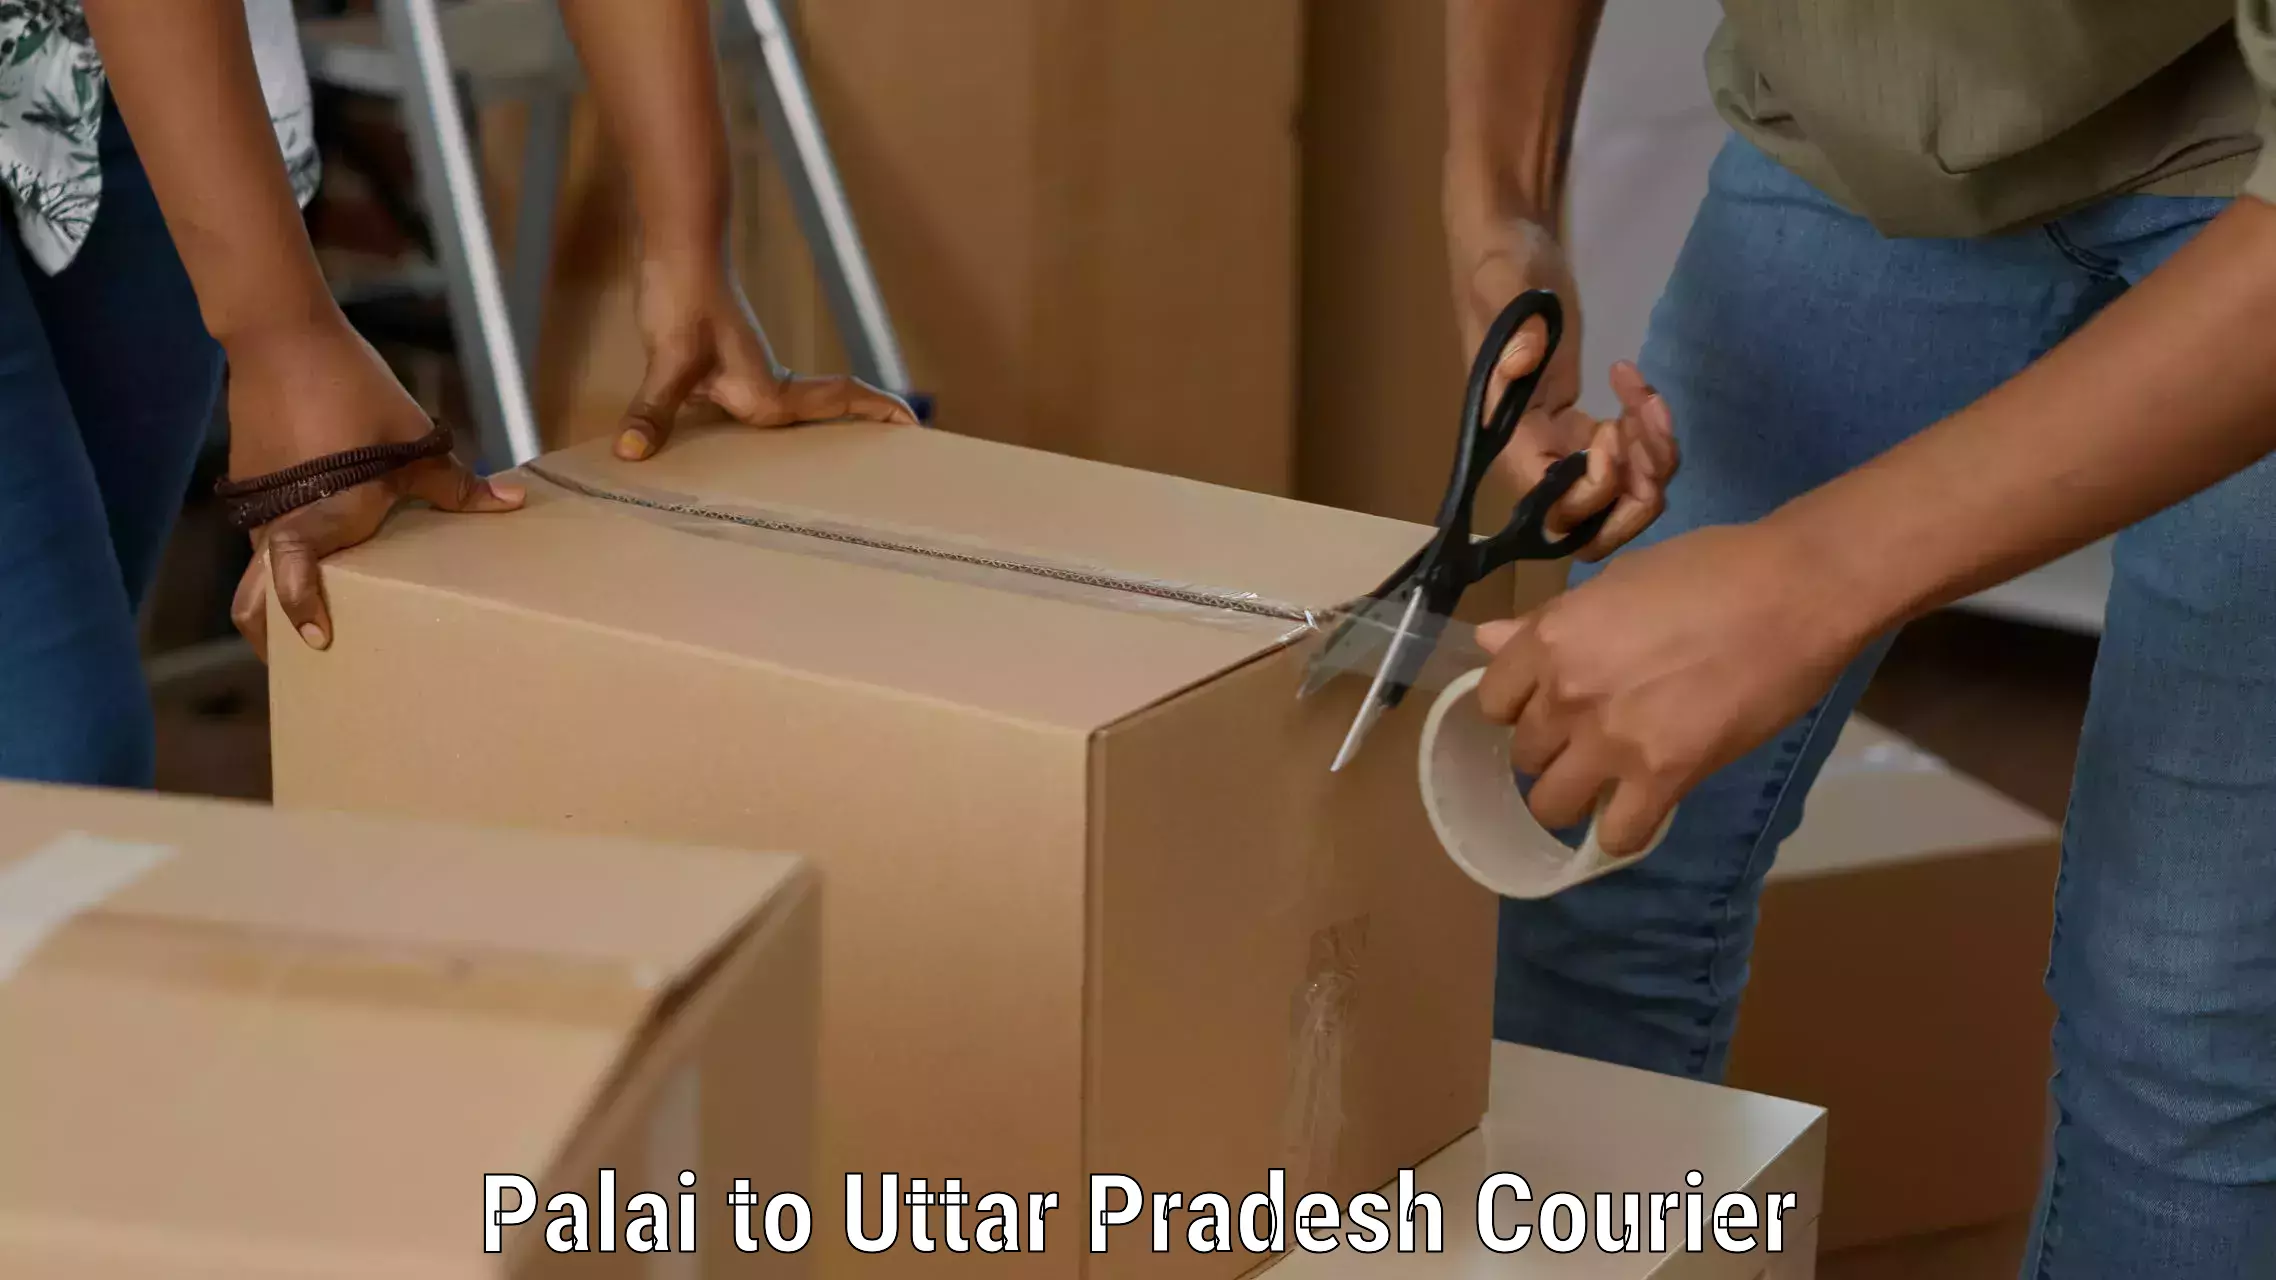 Professional courier services Palai to Orai